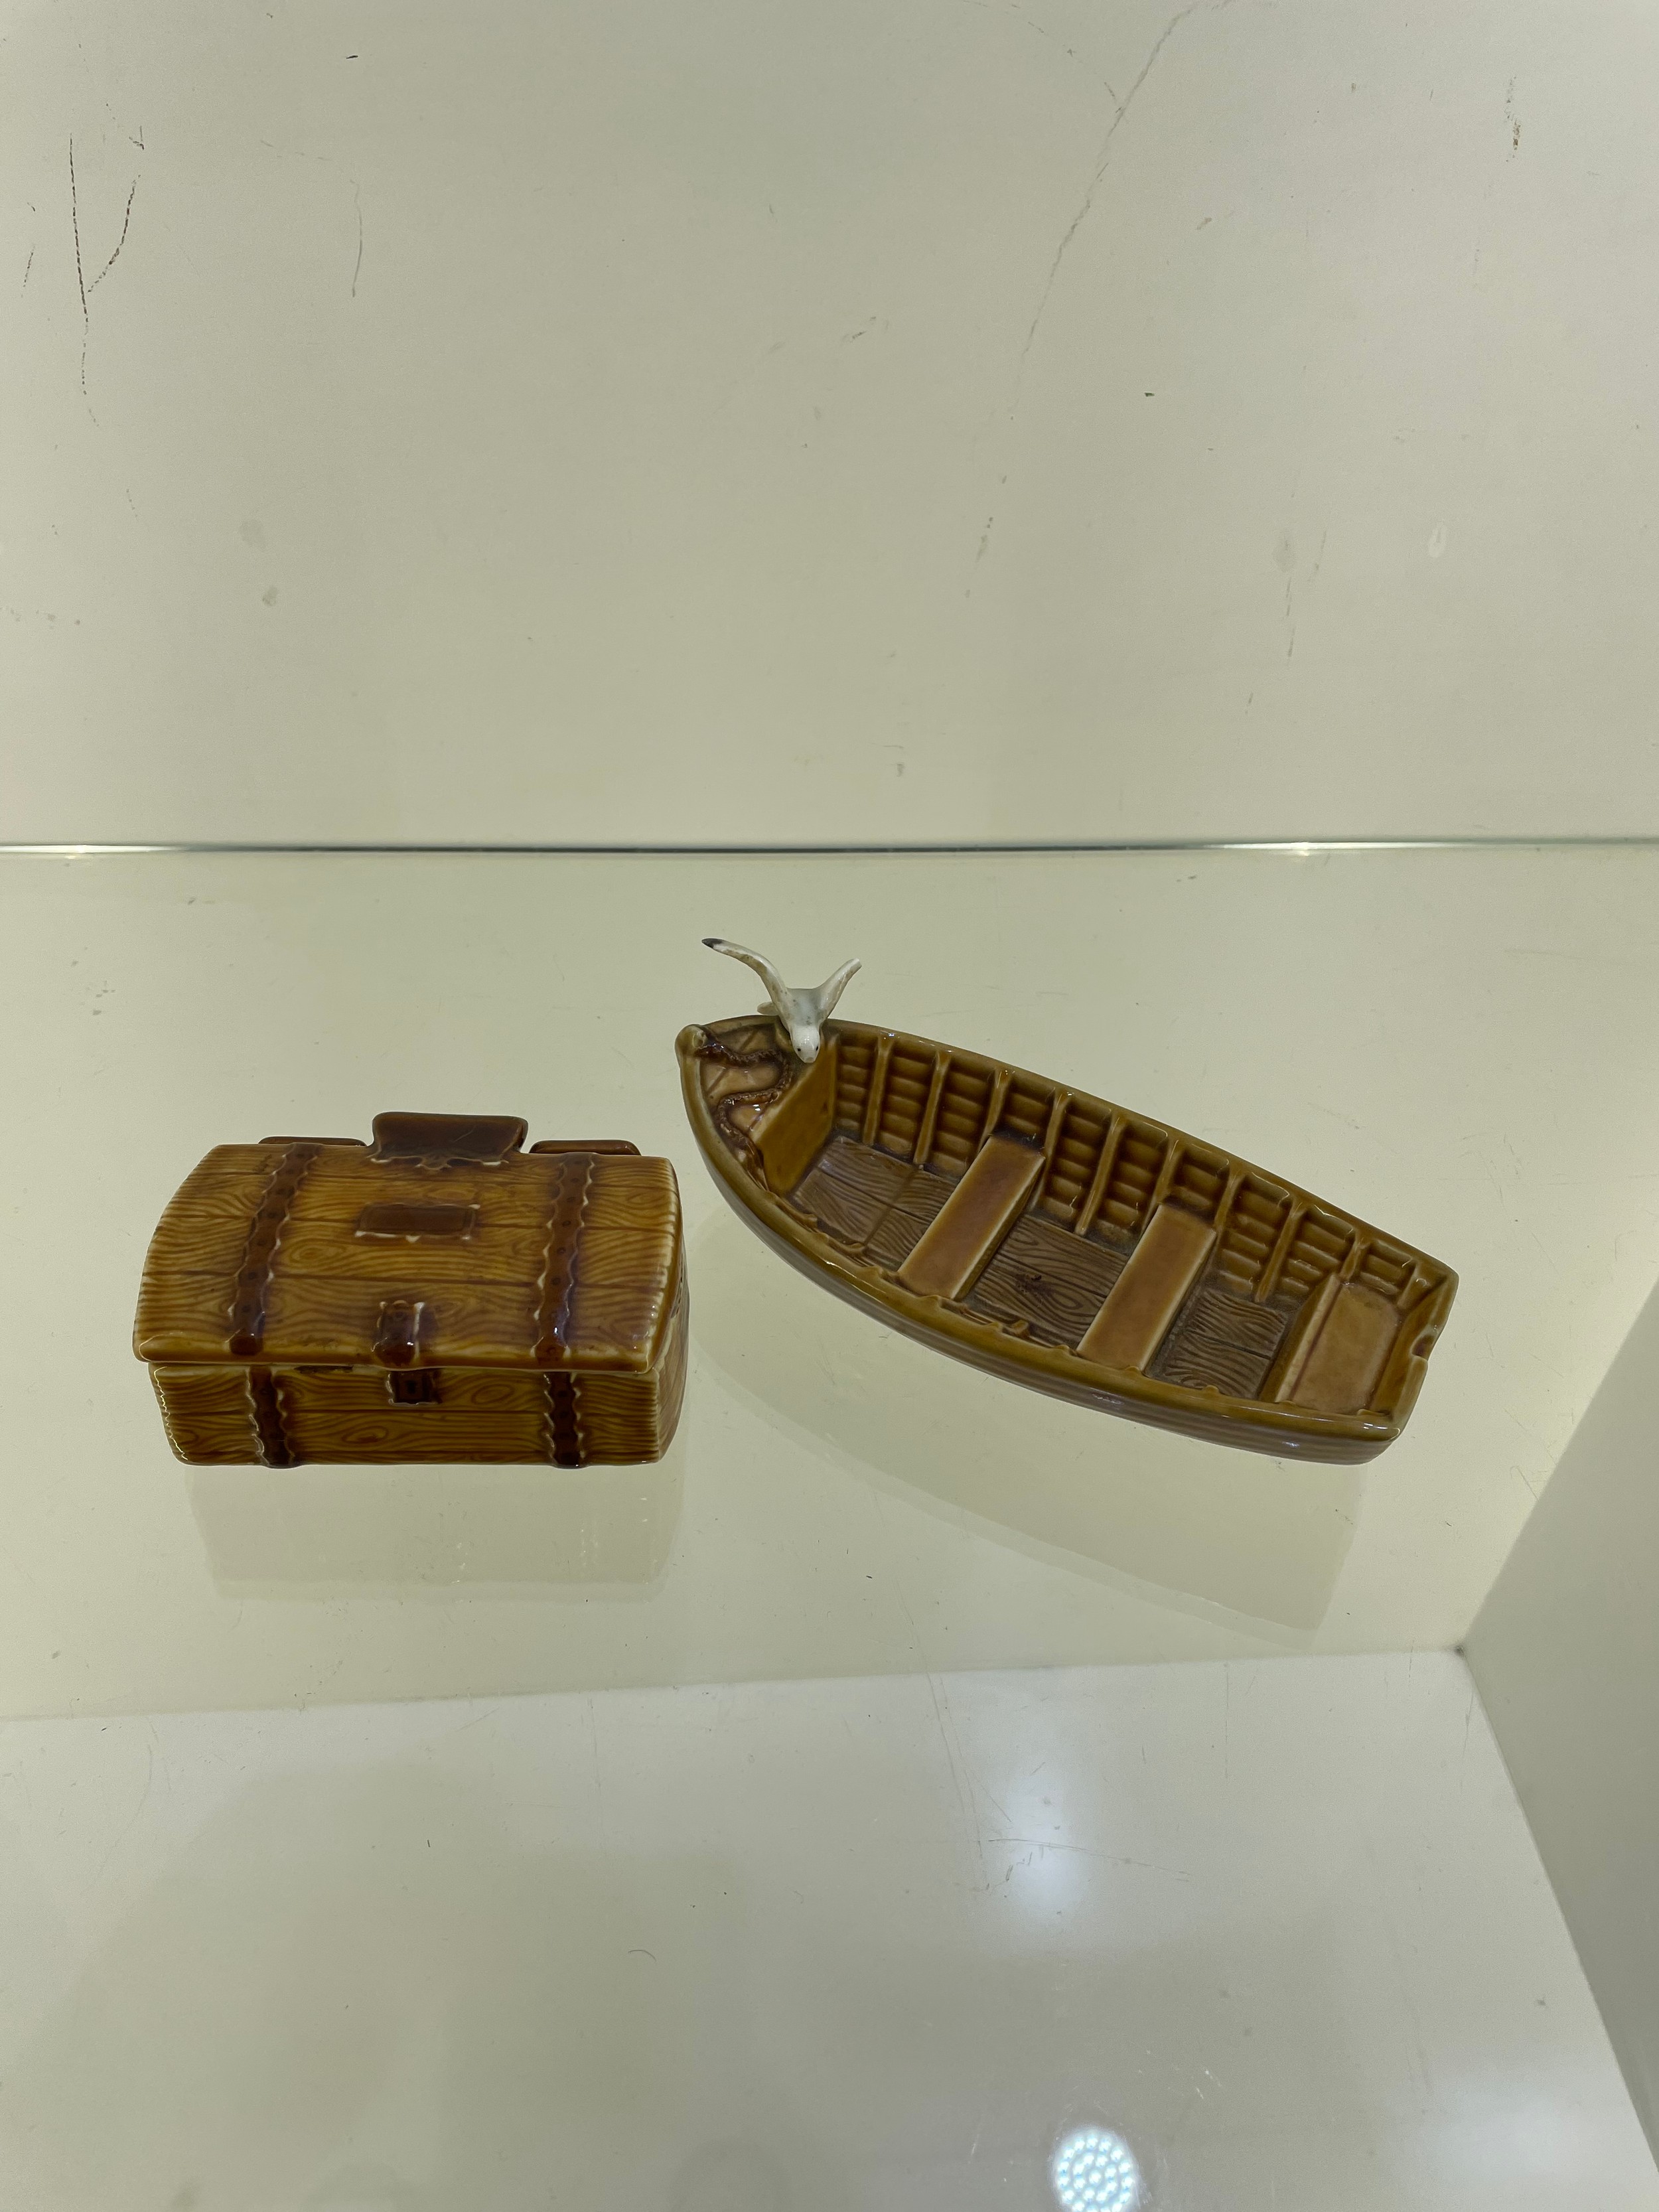 Wade treasure chest and boat